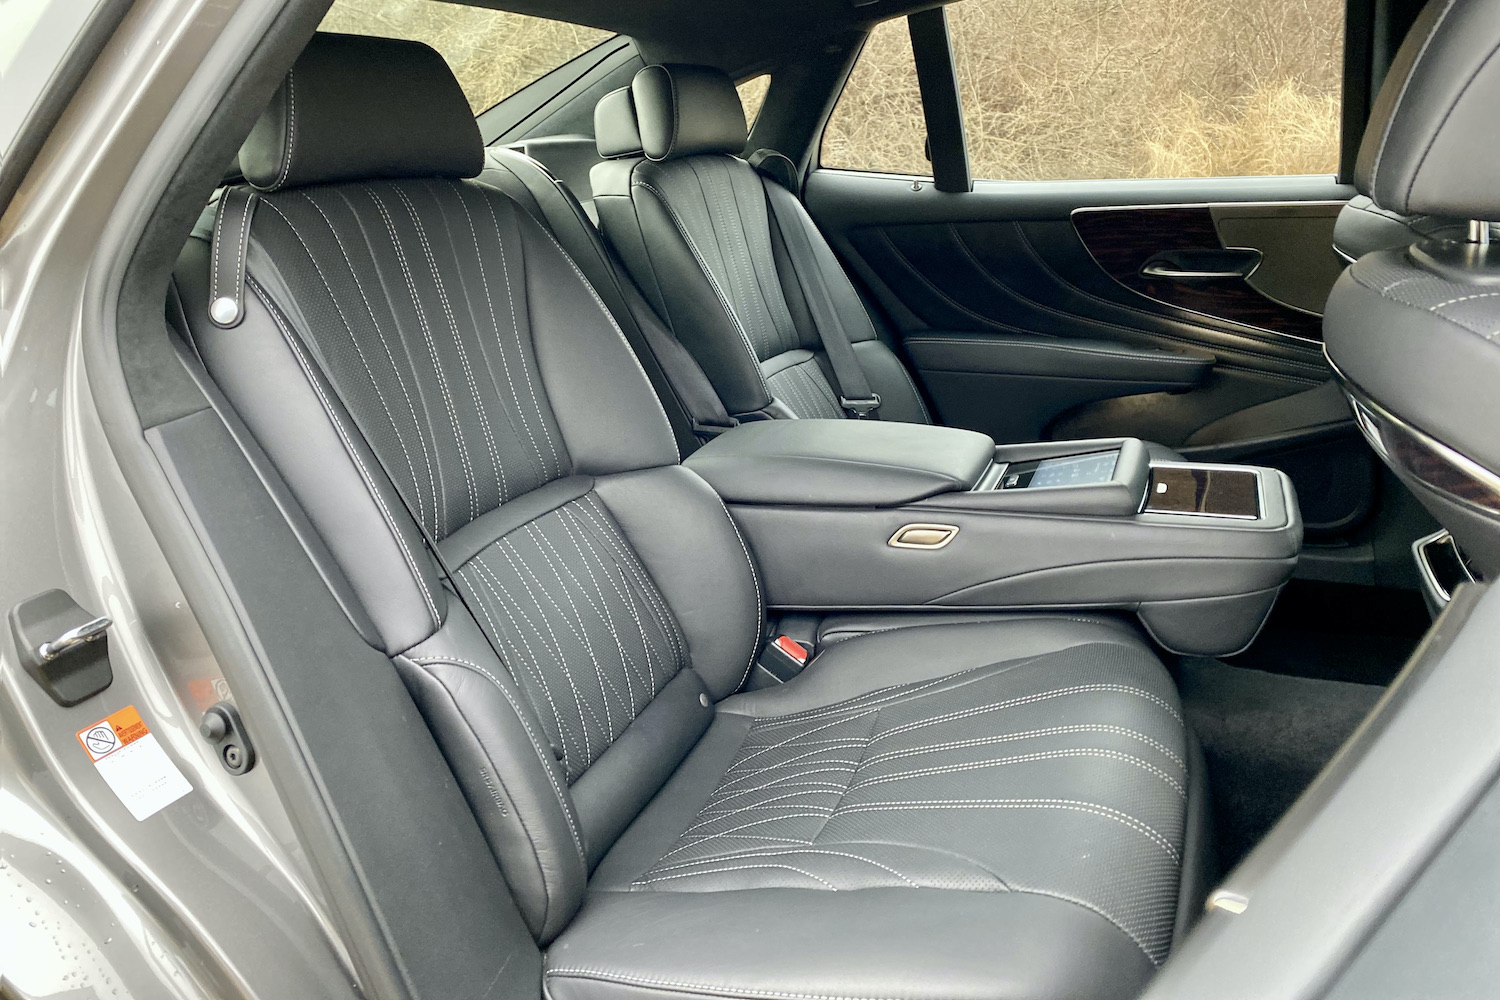 The rear seats in the 2021 Lexus LS500 from outside.